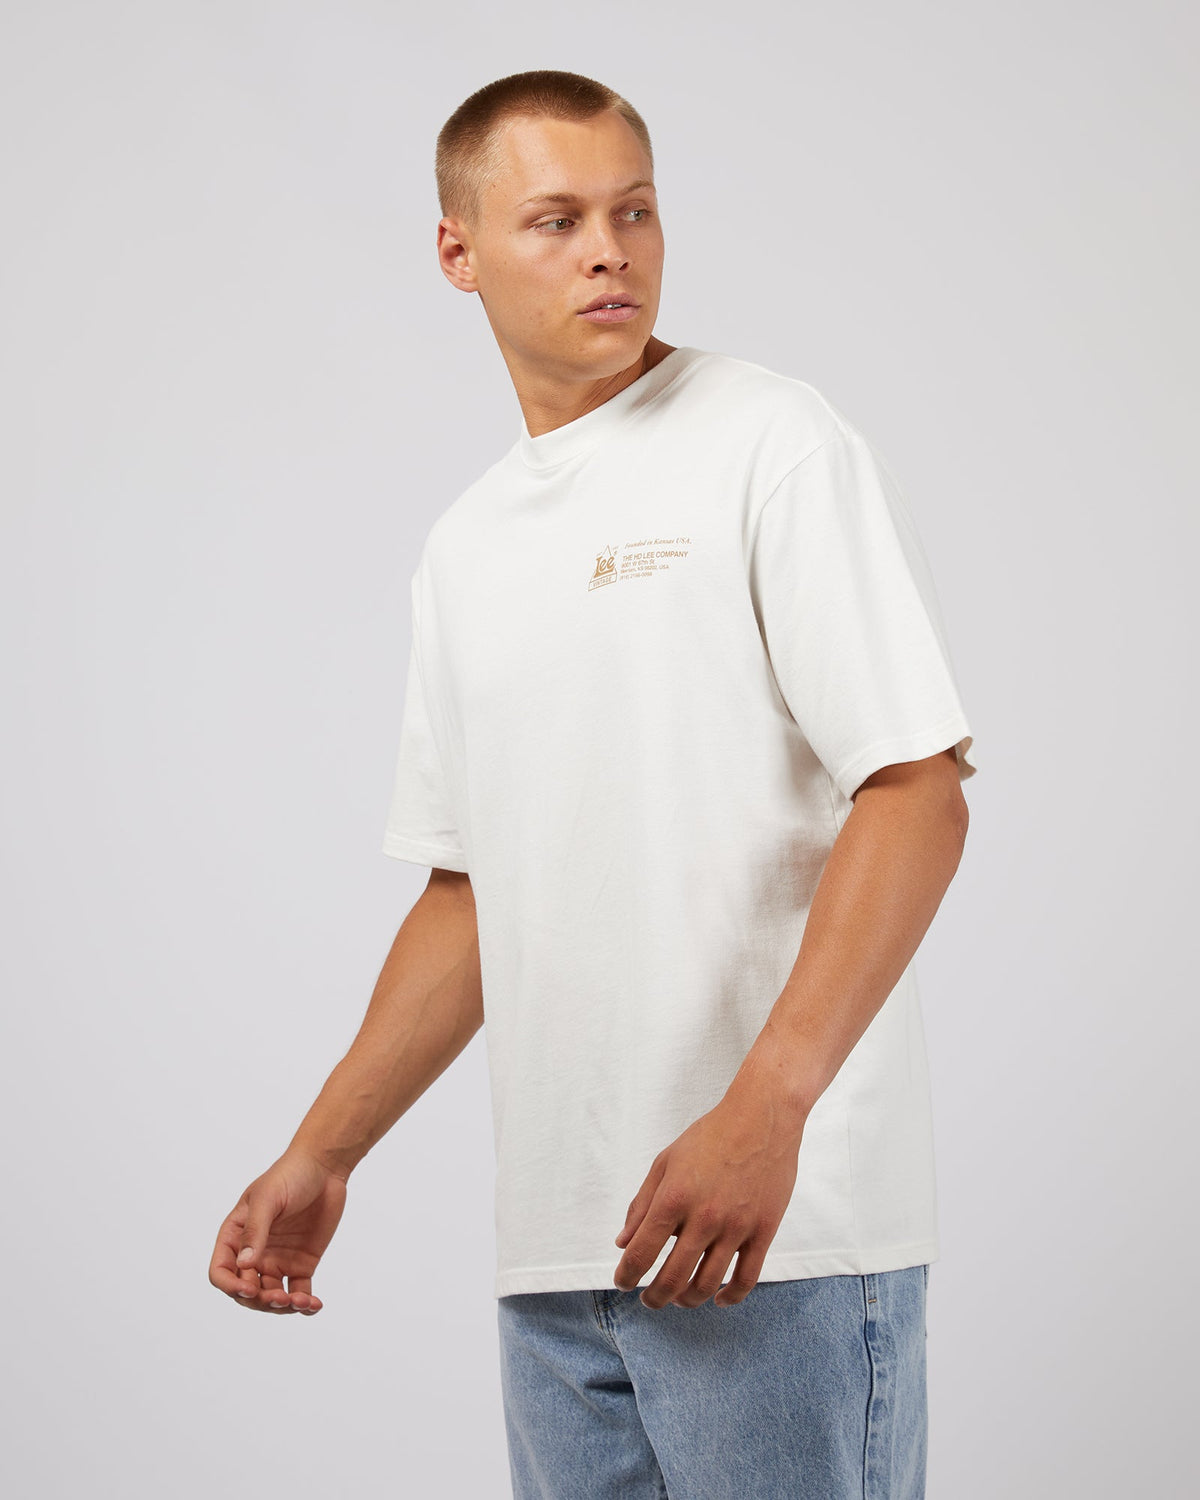 Lee-Business Baggy Tee Vintage White-Edge Clothing